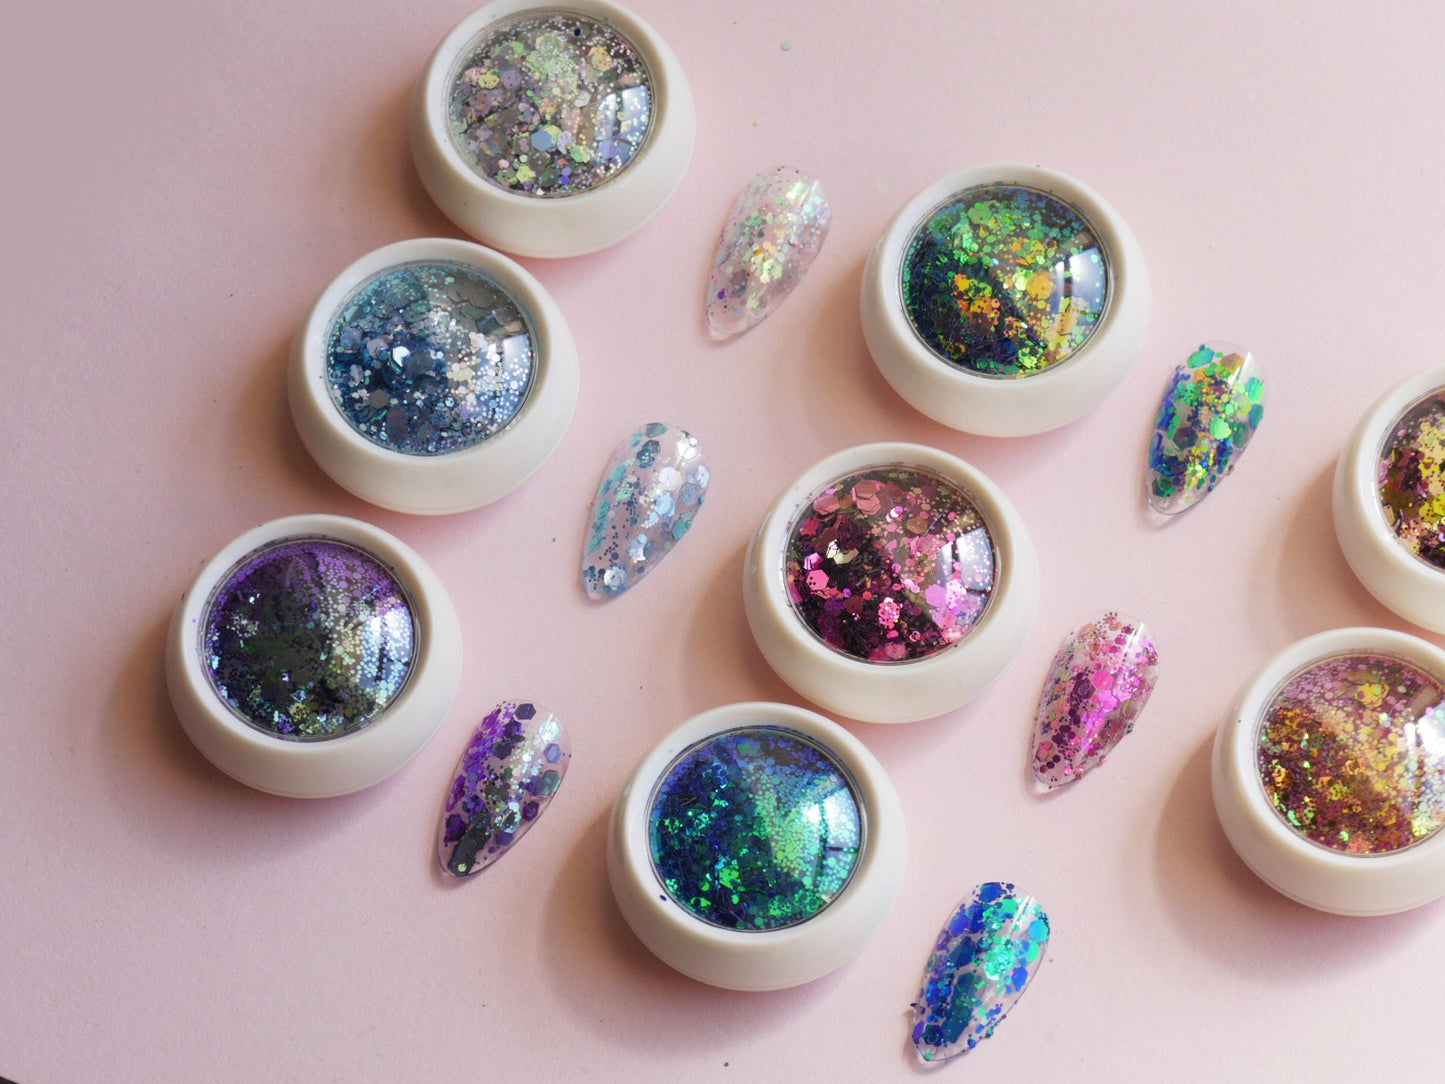 Chameleon Hexagon Mixed Glitter/ Nail Flakes 3D DIY laser Sequins/Multi Metallic Color Round starry sky Glitters nail Supply